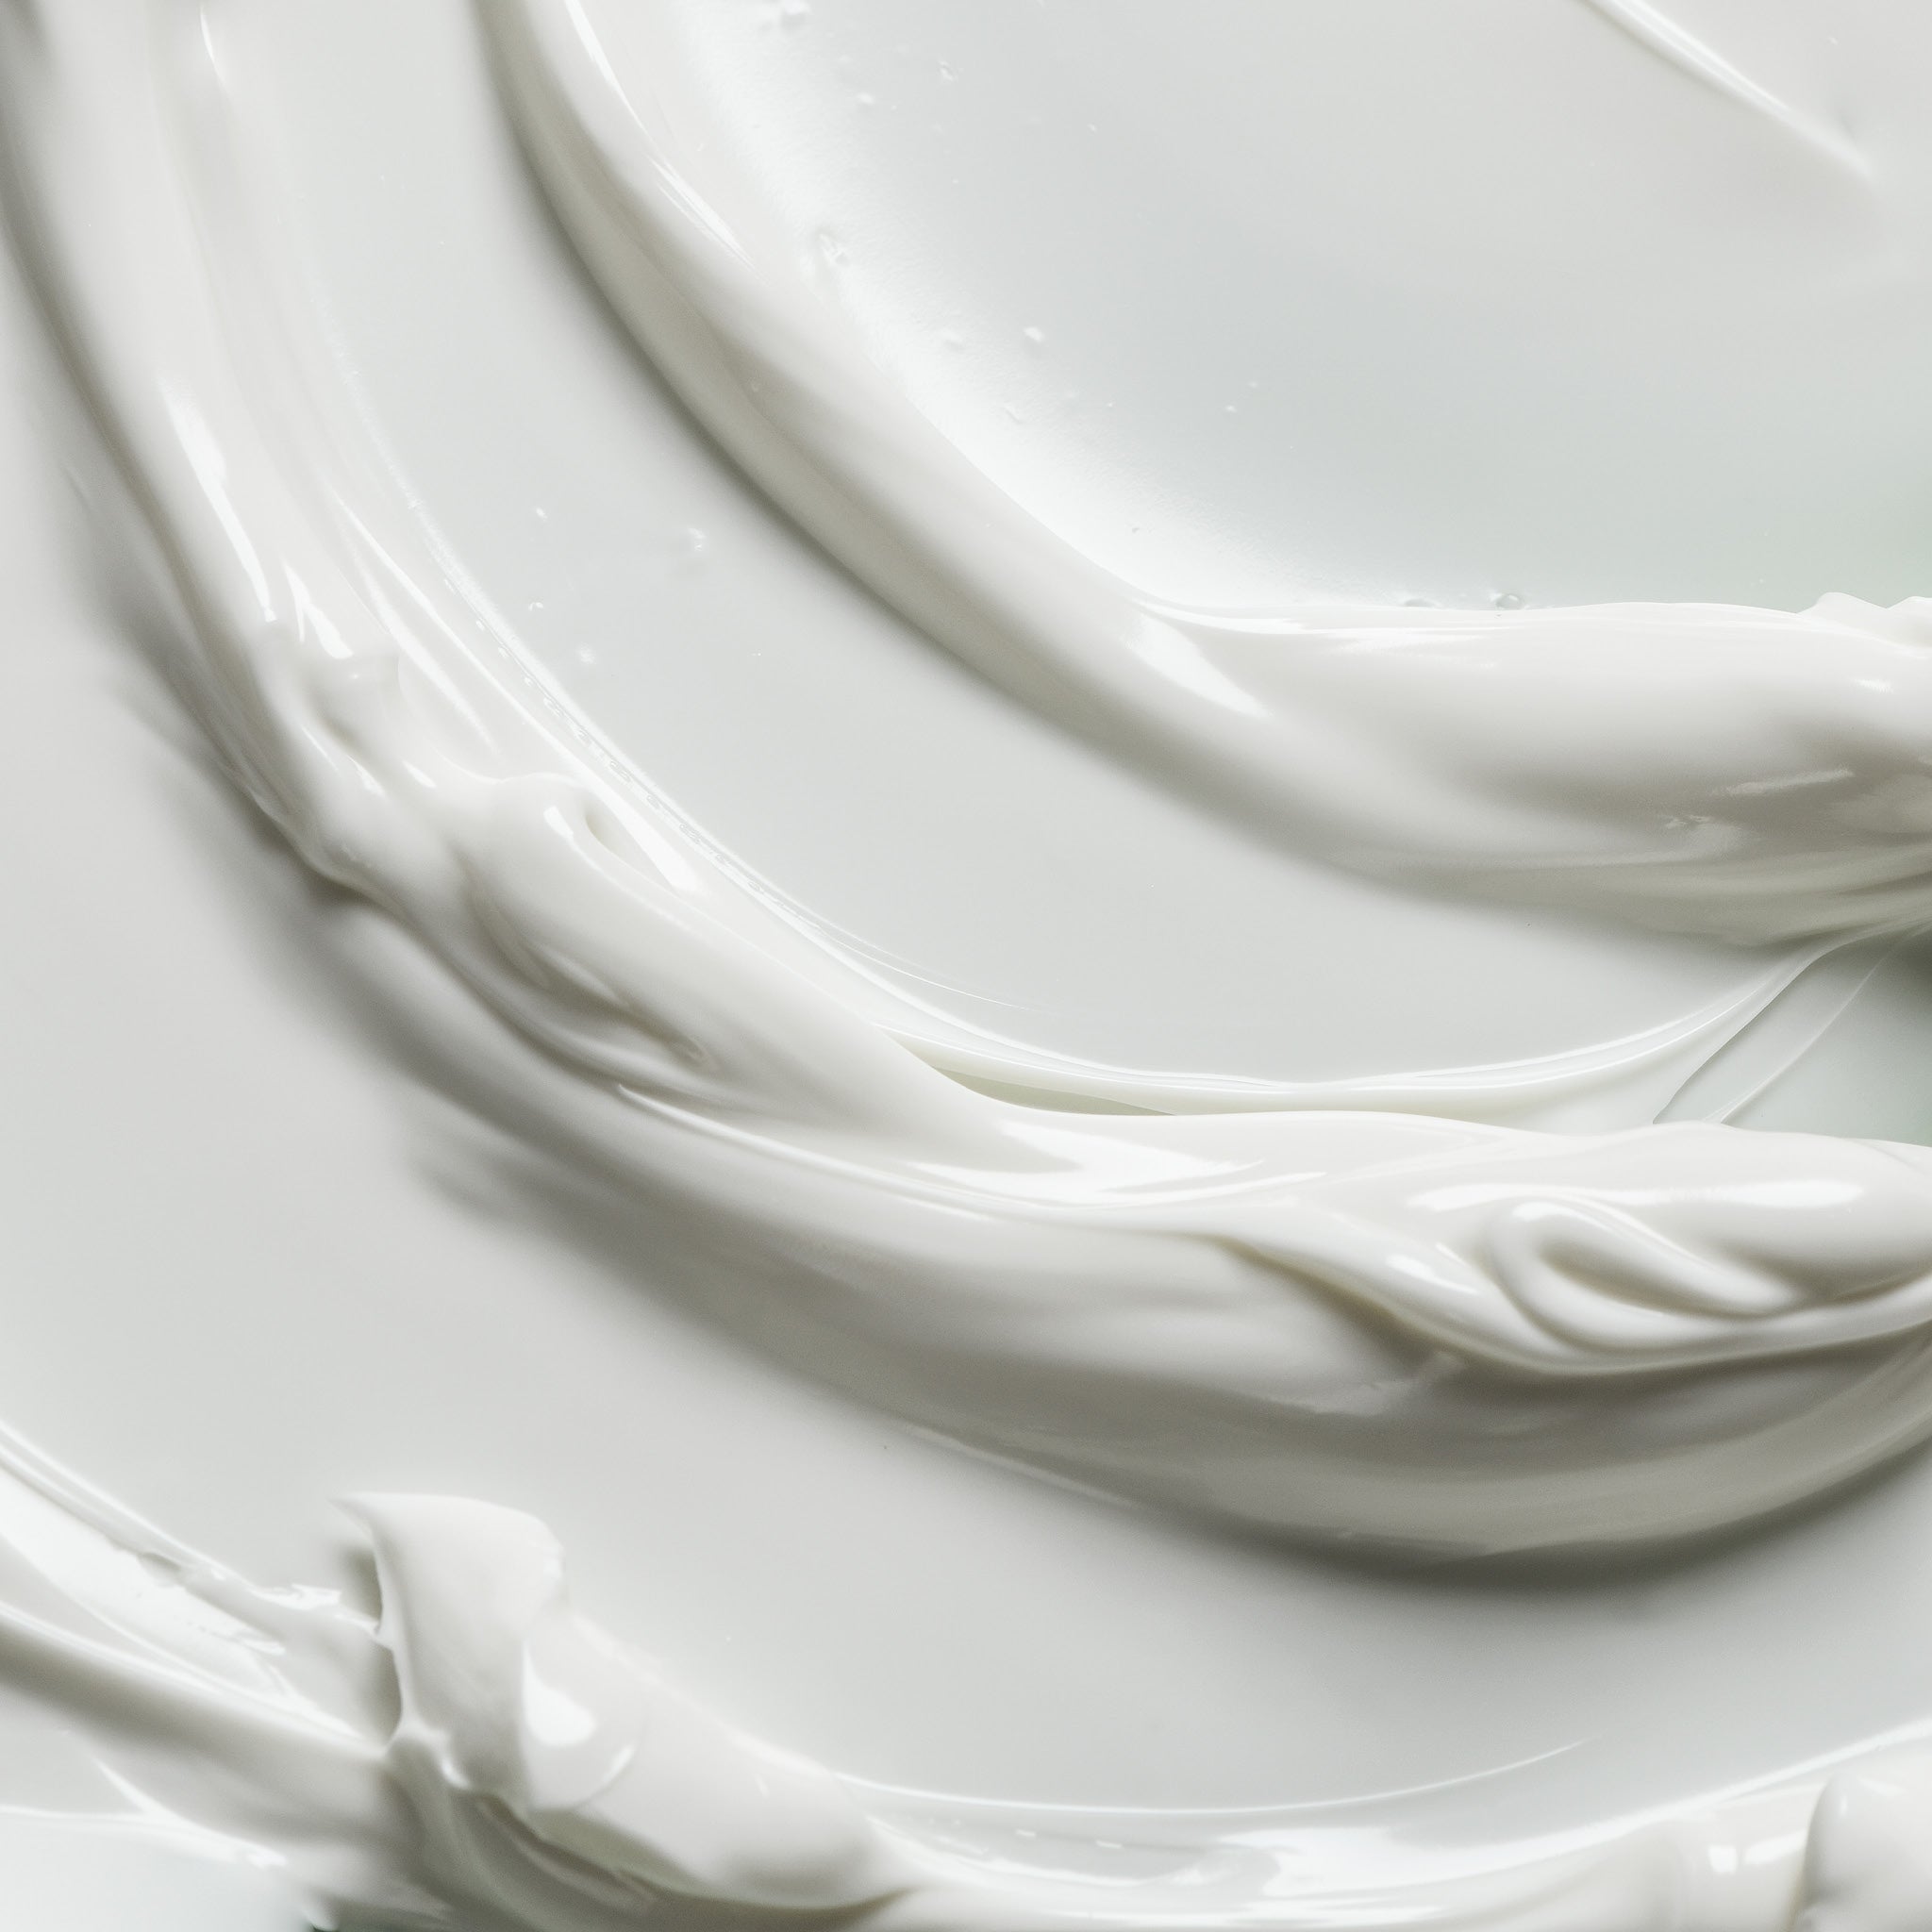 Experience the smooth, lightweight feel of Alivio Nourishing Day Cream. Image shows a close-up of the cream's texture.